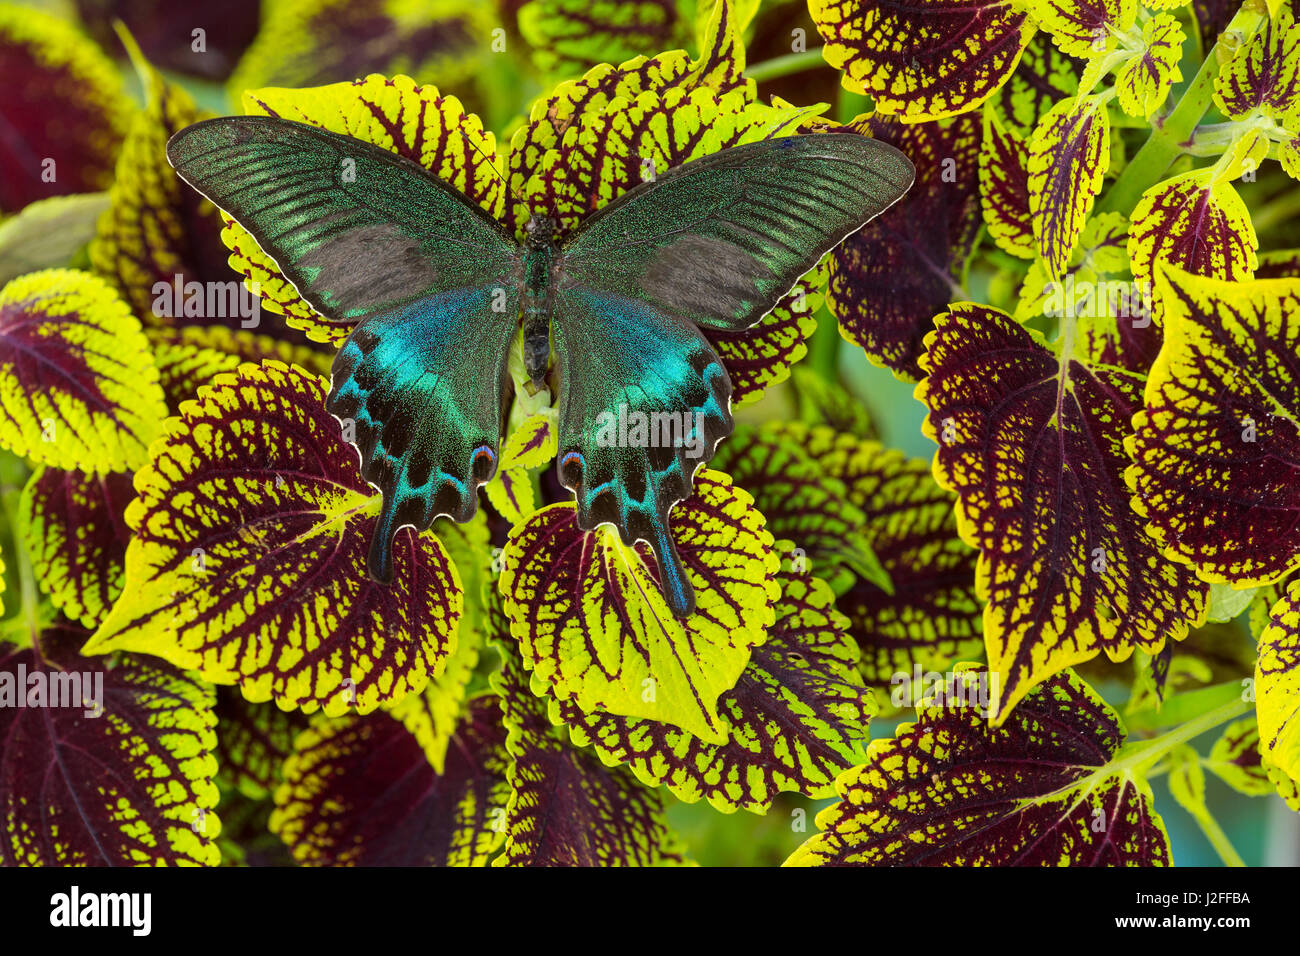 Common Peacock Swallowtail Butterfly, Papilio bianor Stock Photo